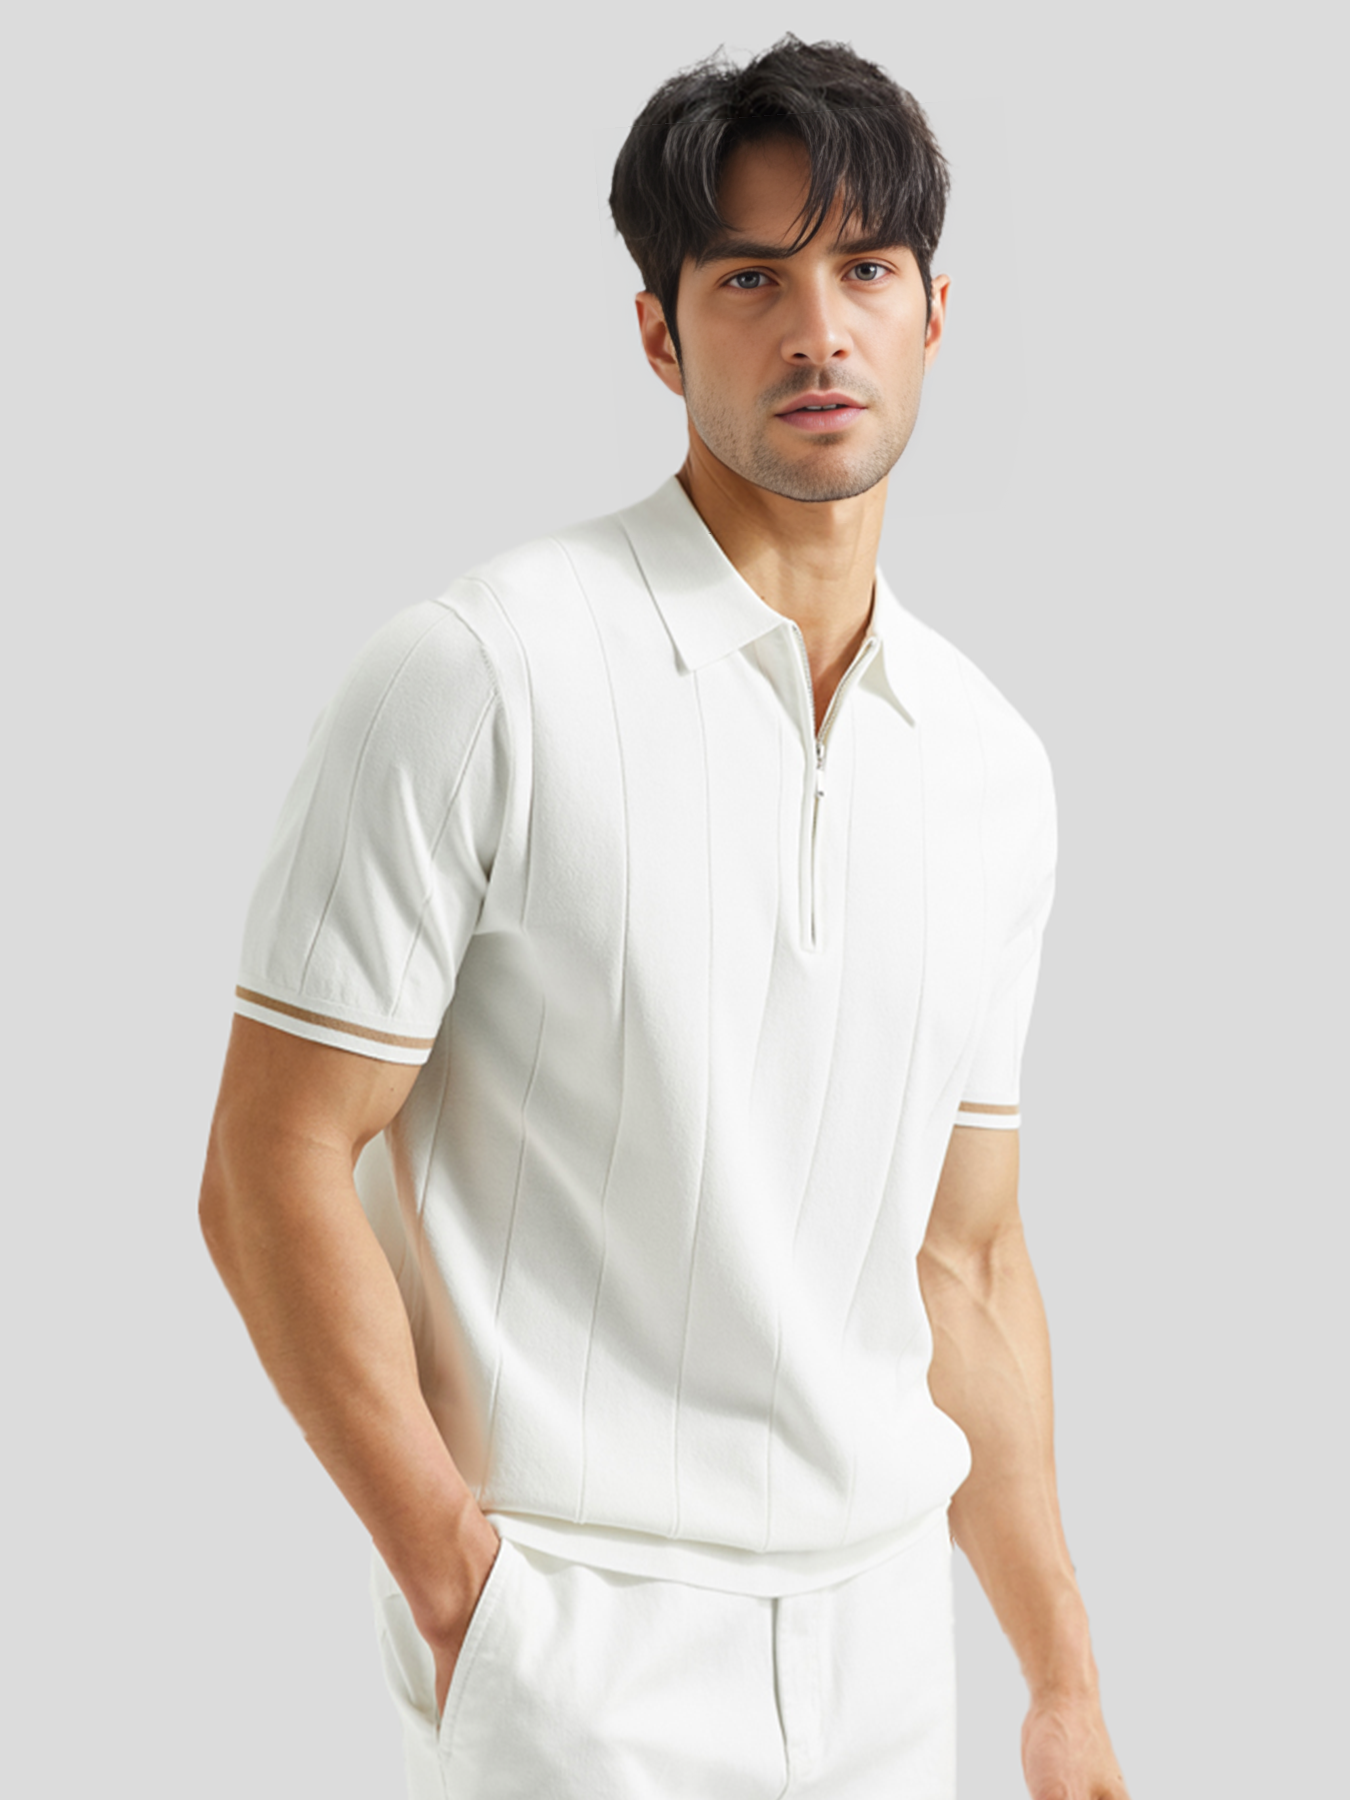 CoolKnit Breathable Short Sleeve Zip Knitted Polo